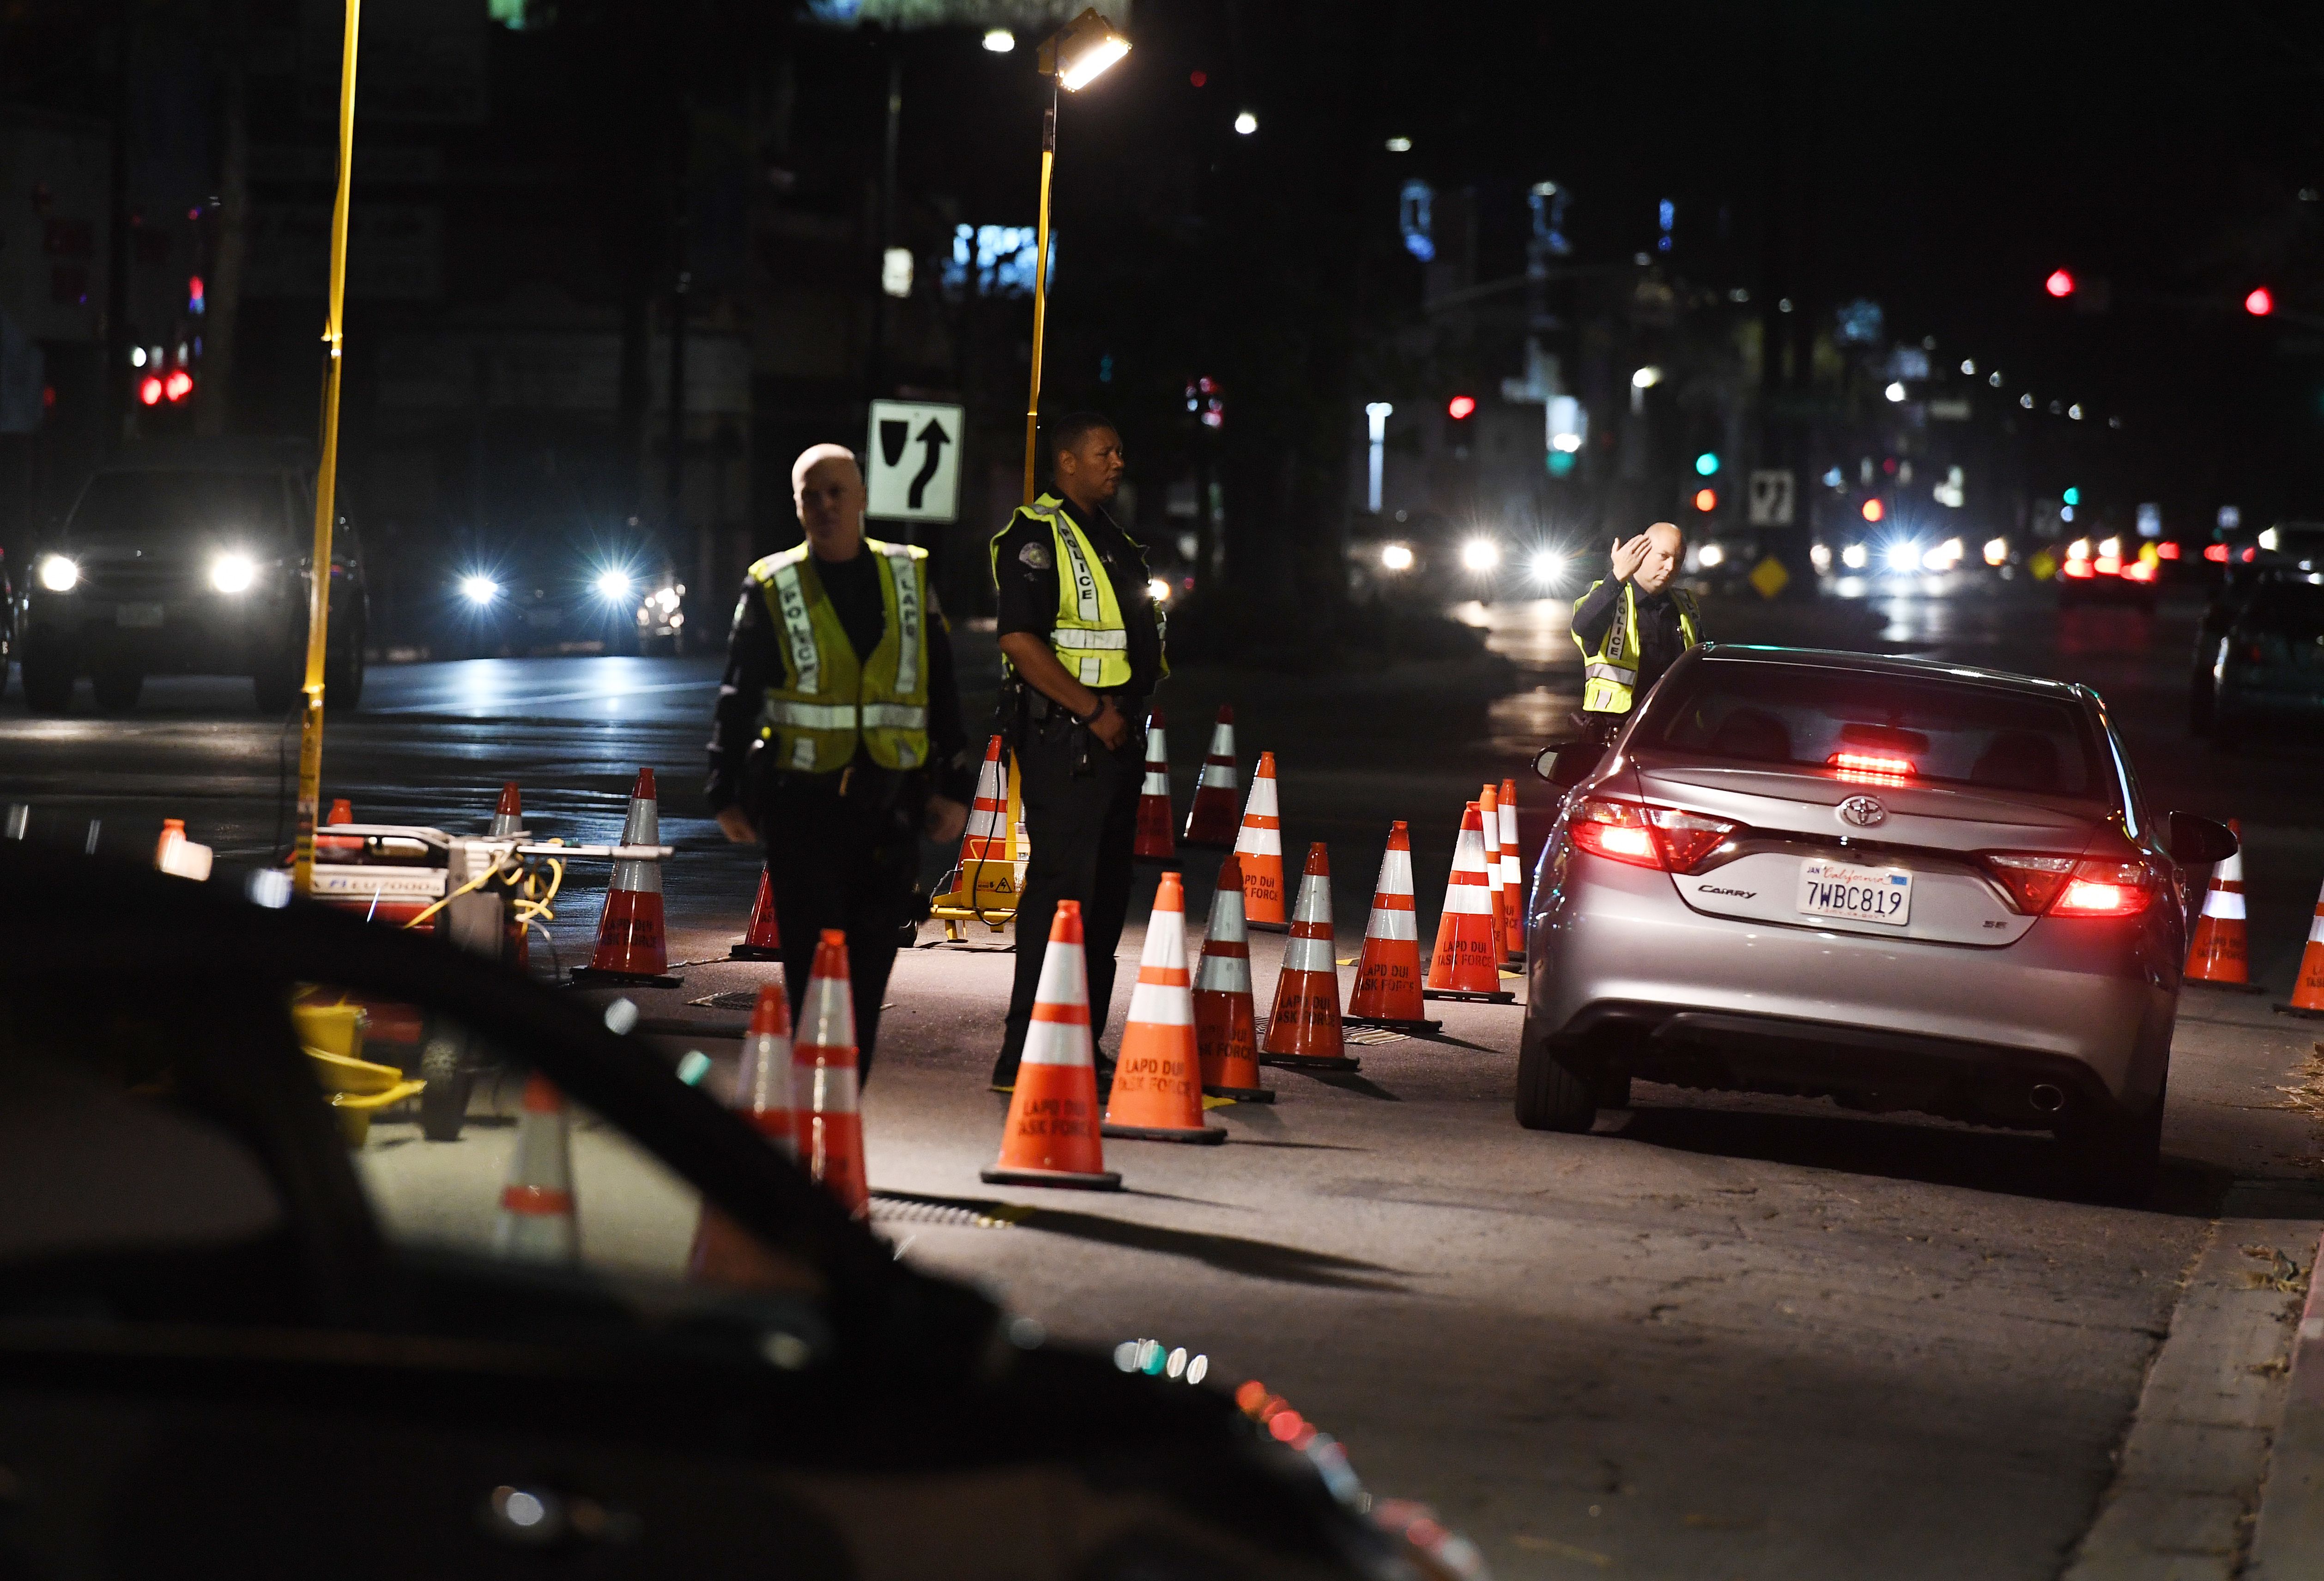 LAPD police check drivers at a DUI checkpoint in Reseda, Los Angeles, California on April 13, 2018. (MARK RALSTON/AFP/Getty Images)